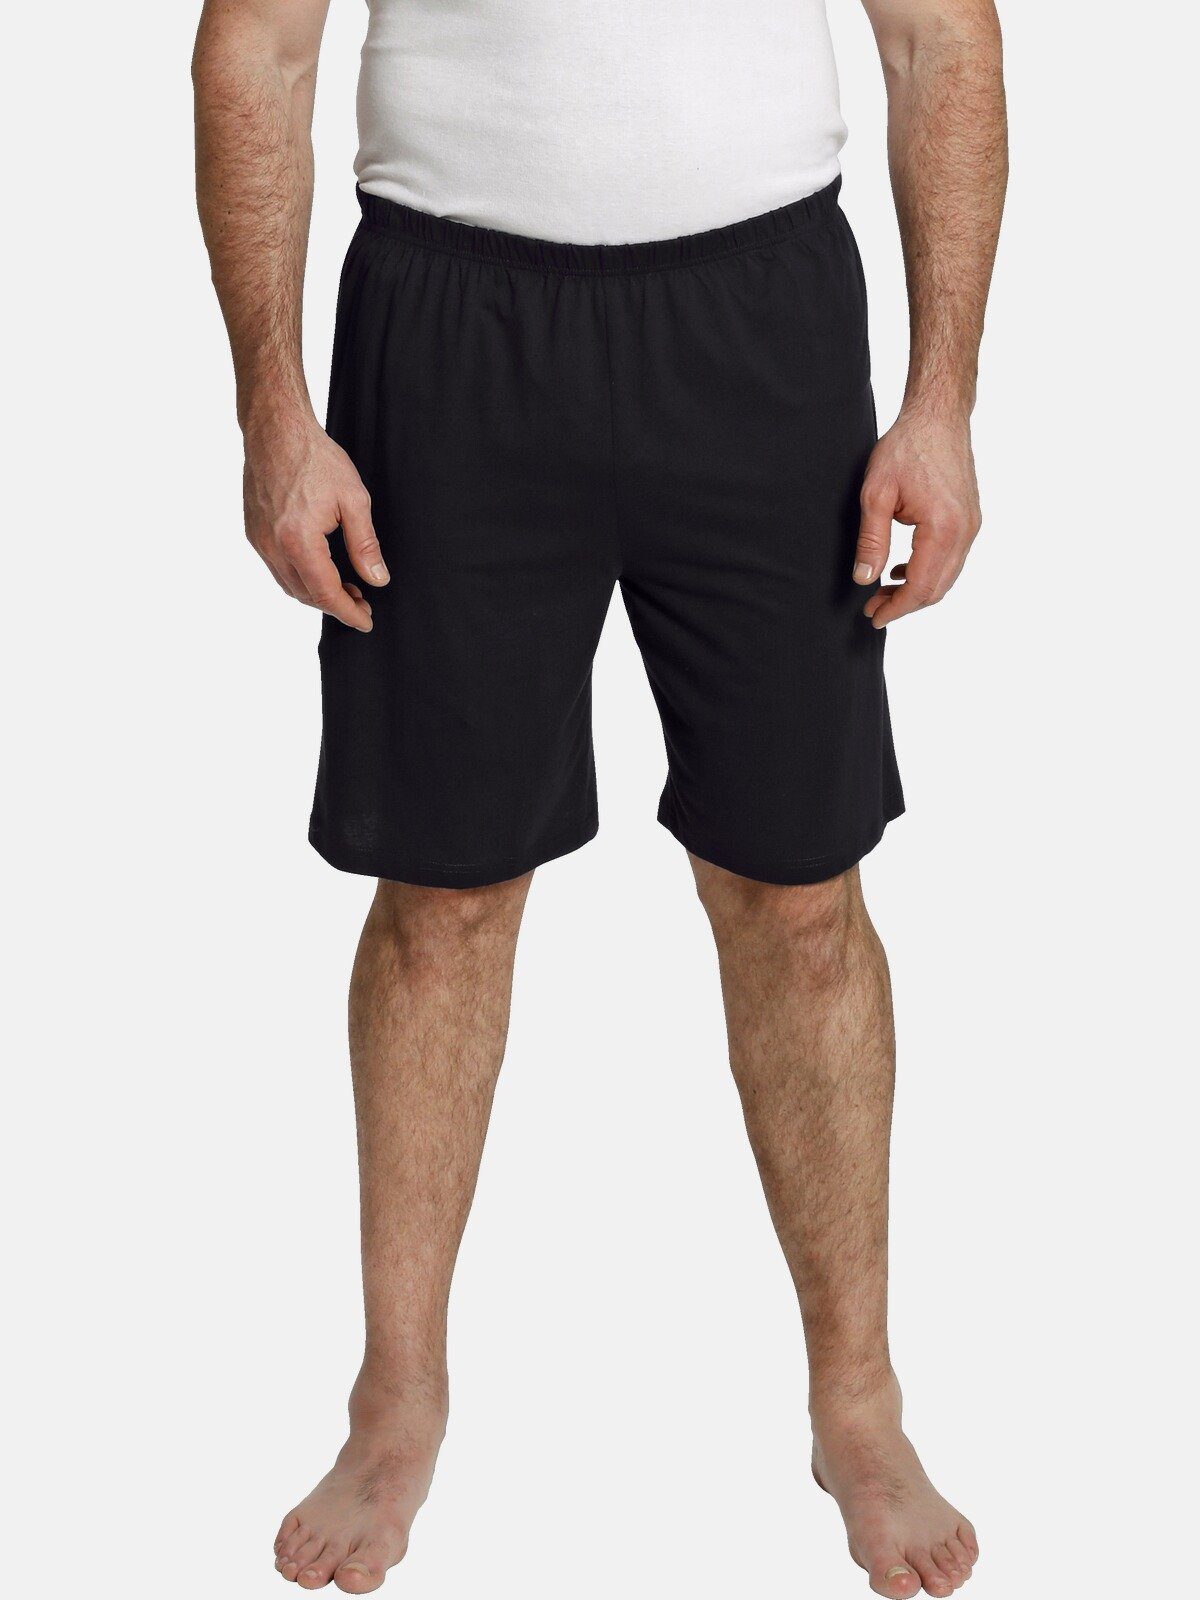 Charles Colby Schlafhose LORD MYCROFT leichte bequeme Relaxshorts dunkelblau